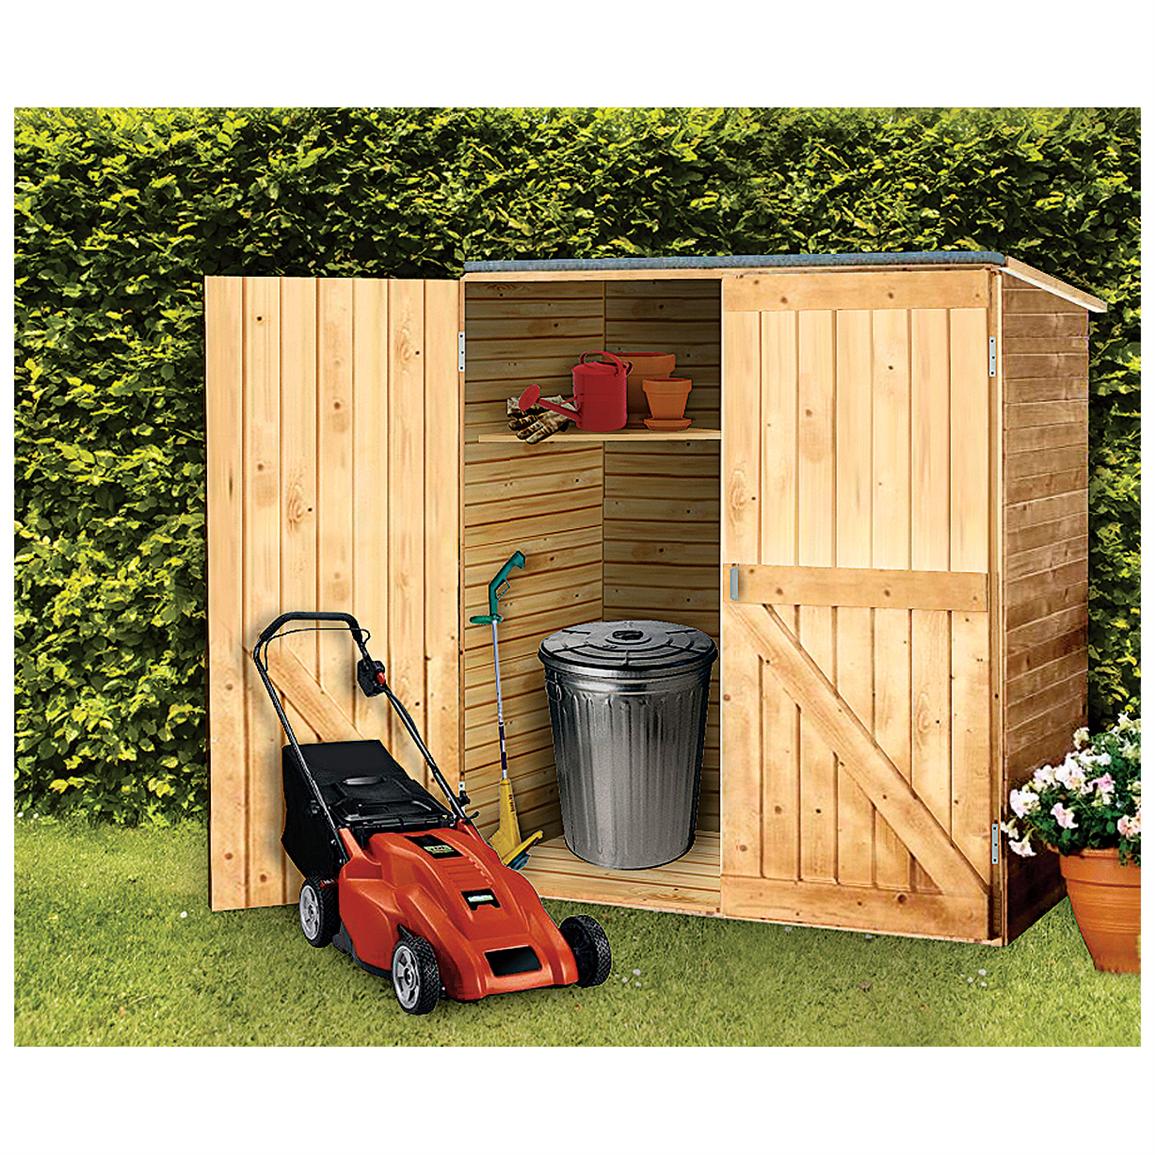 Solid Wood Outdoor Storage Shed - 236390, Patio Storage at ...